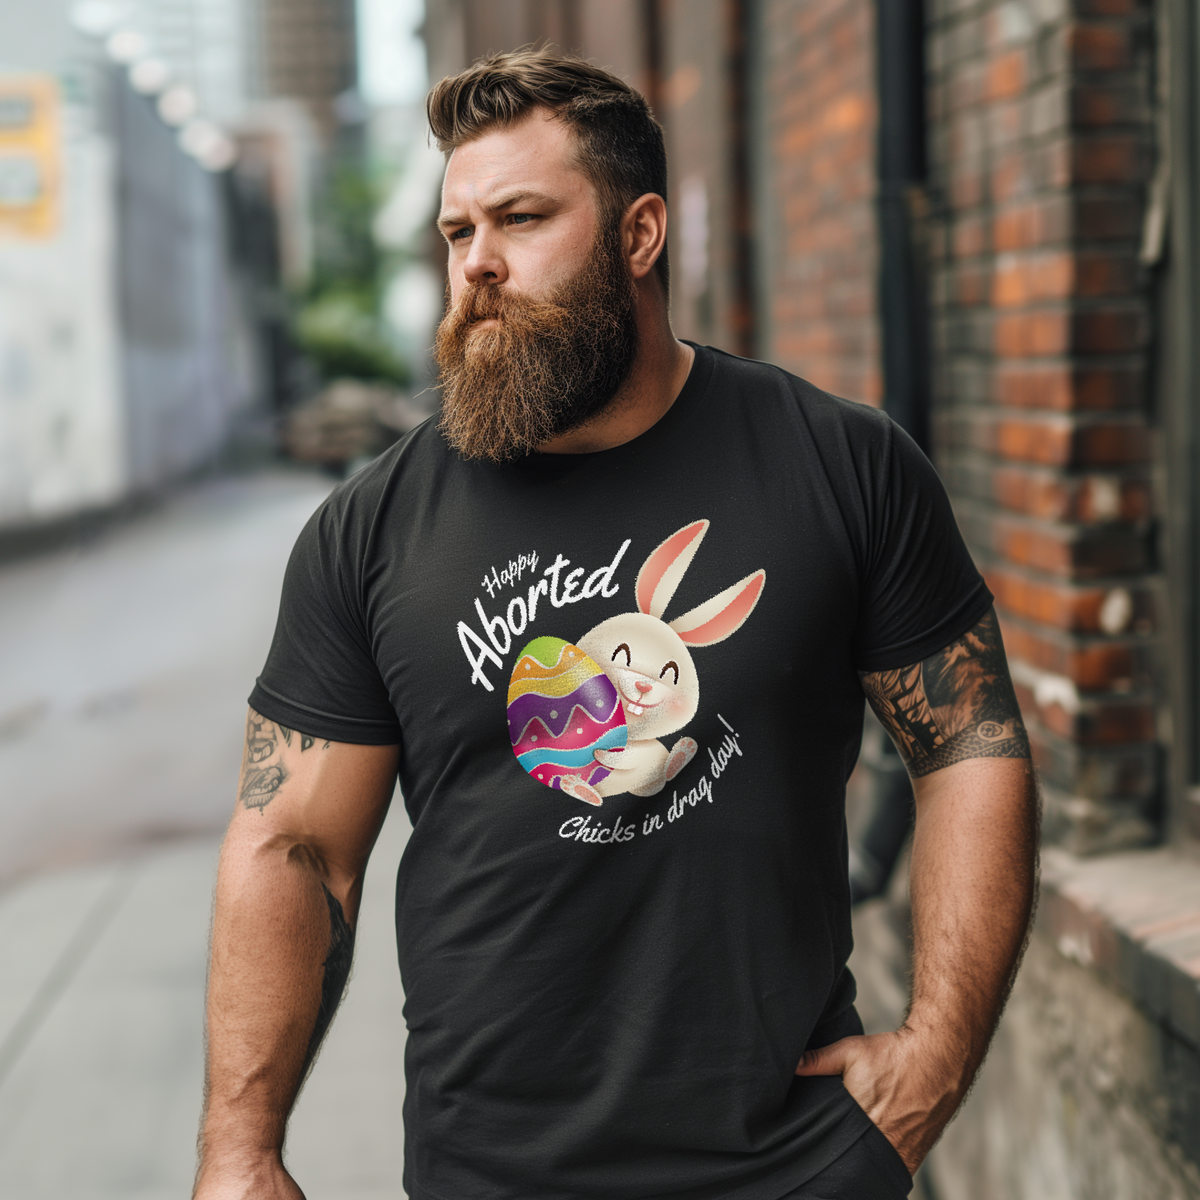 Irreverent Easter Tee Sure to Make Christians Clutch Their Pearls - Tee - Twisted Jezebel